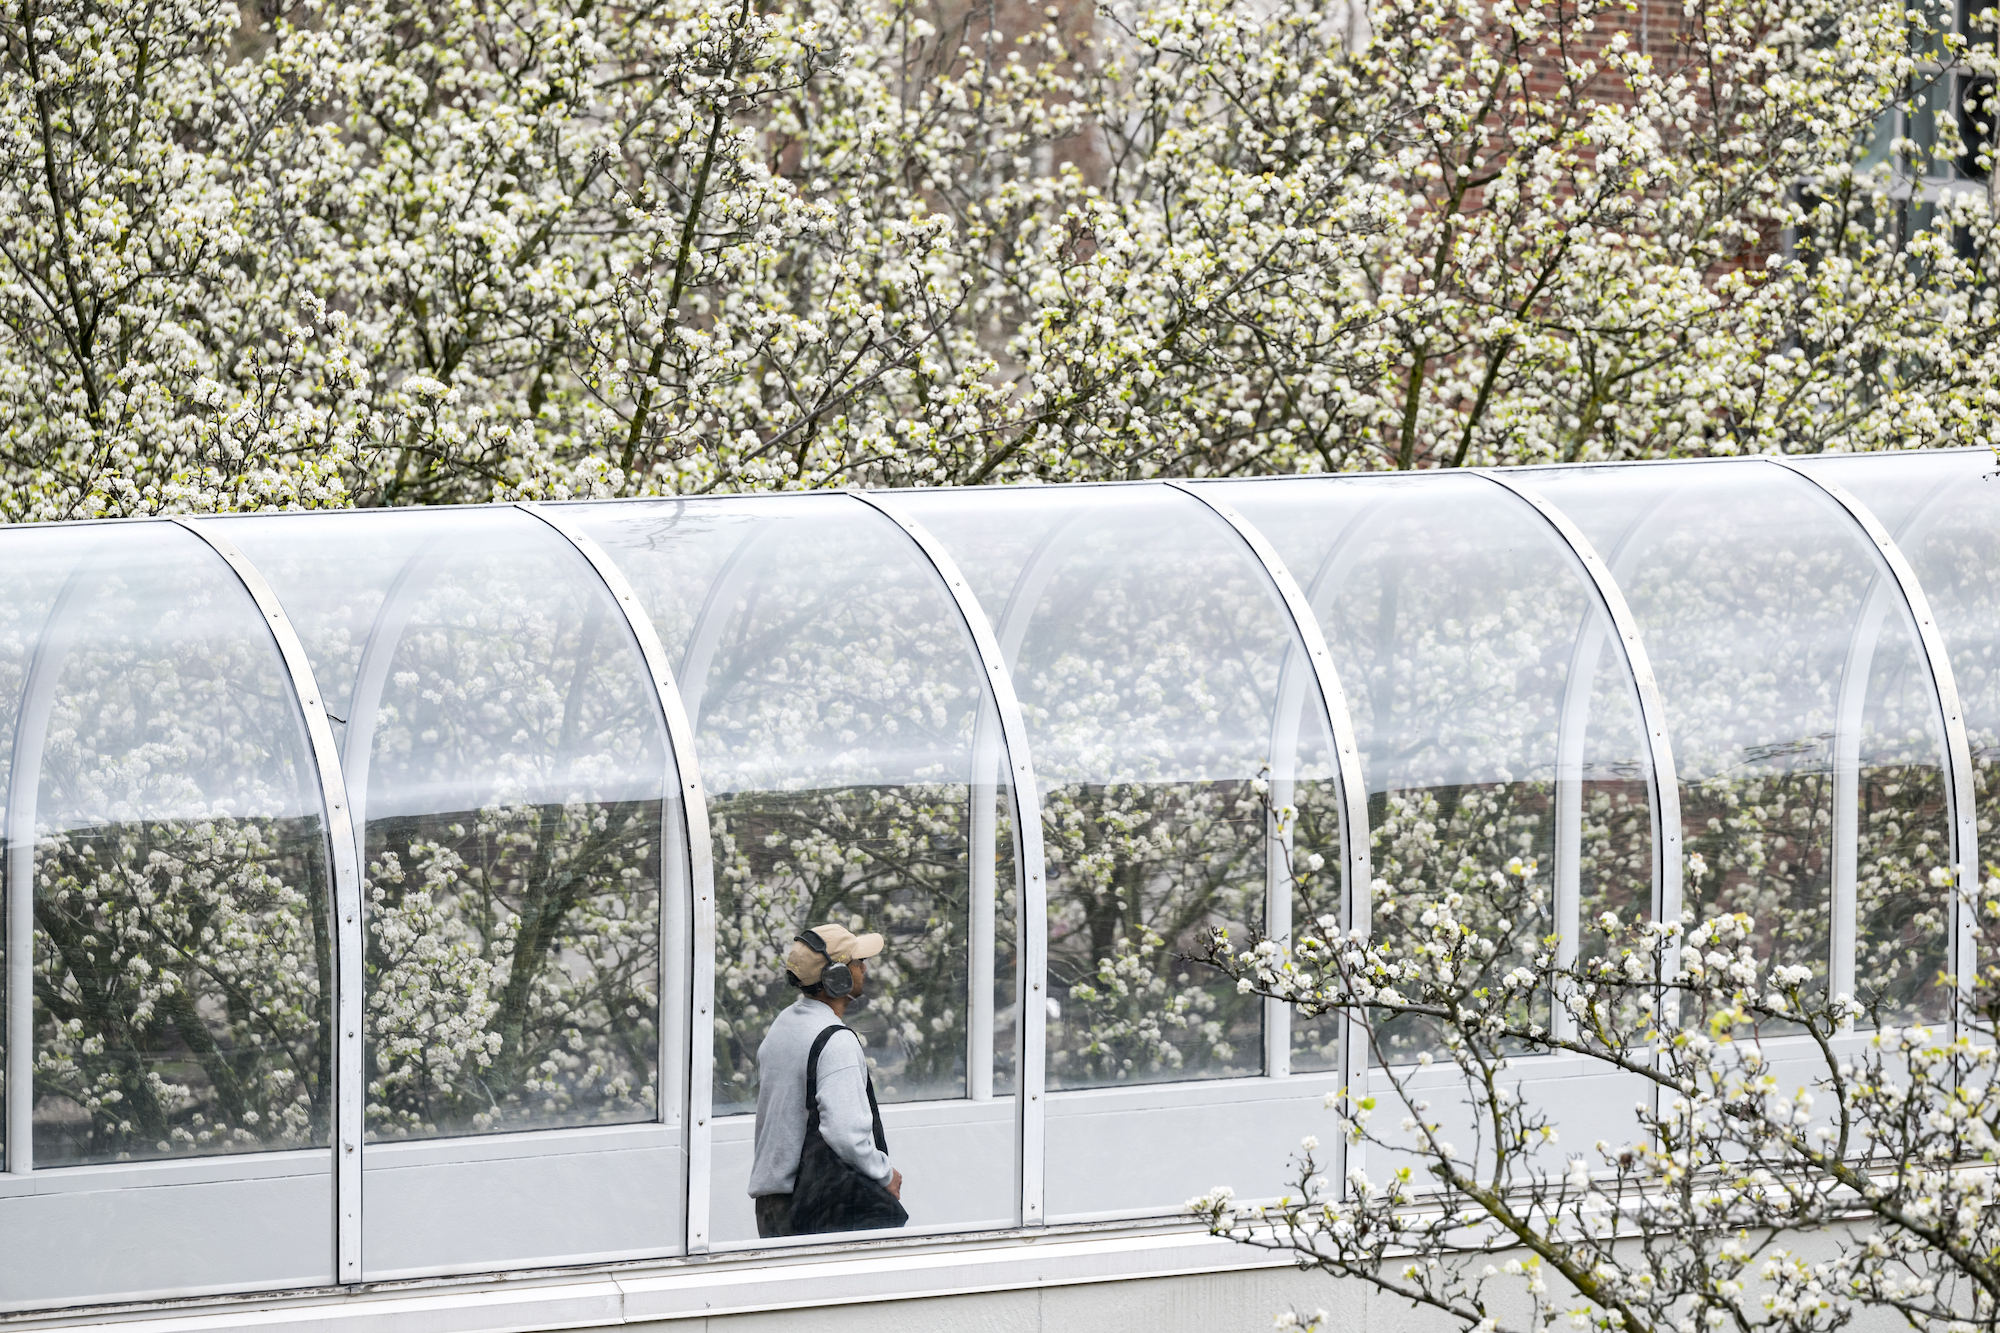 People pass through the glass covered bridge surrounded by white flowering trees